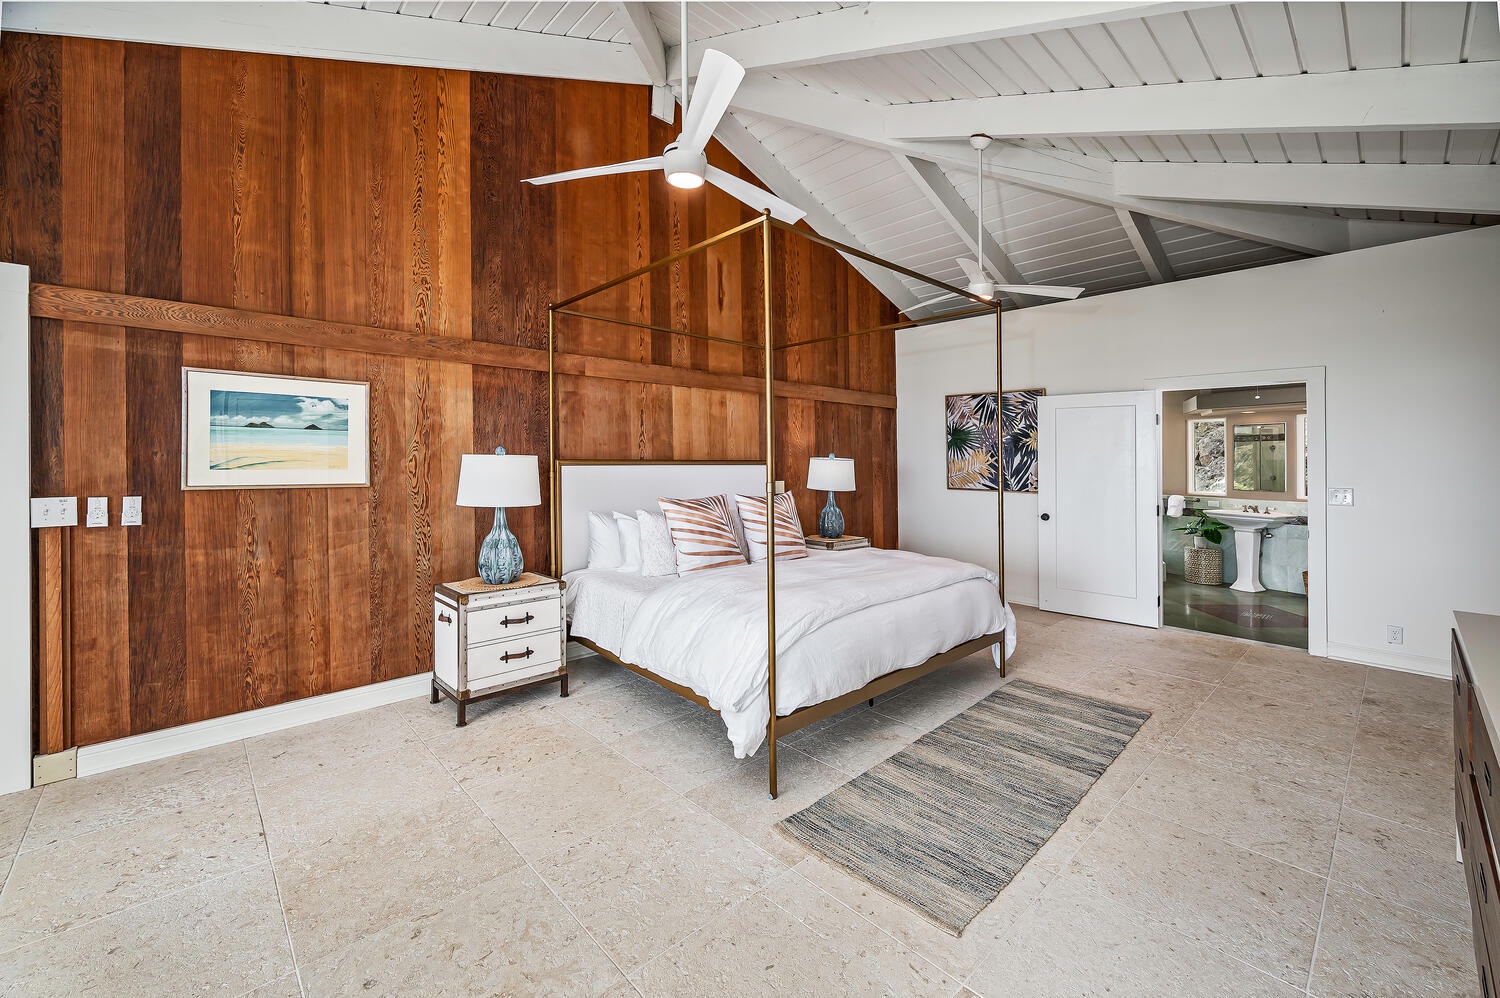 Kailua Vacation Rentals, Hale Lani - Primary bedroom has king bed, ensuite, ceiling fans, and ocean views